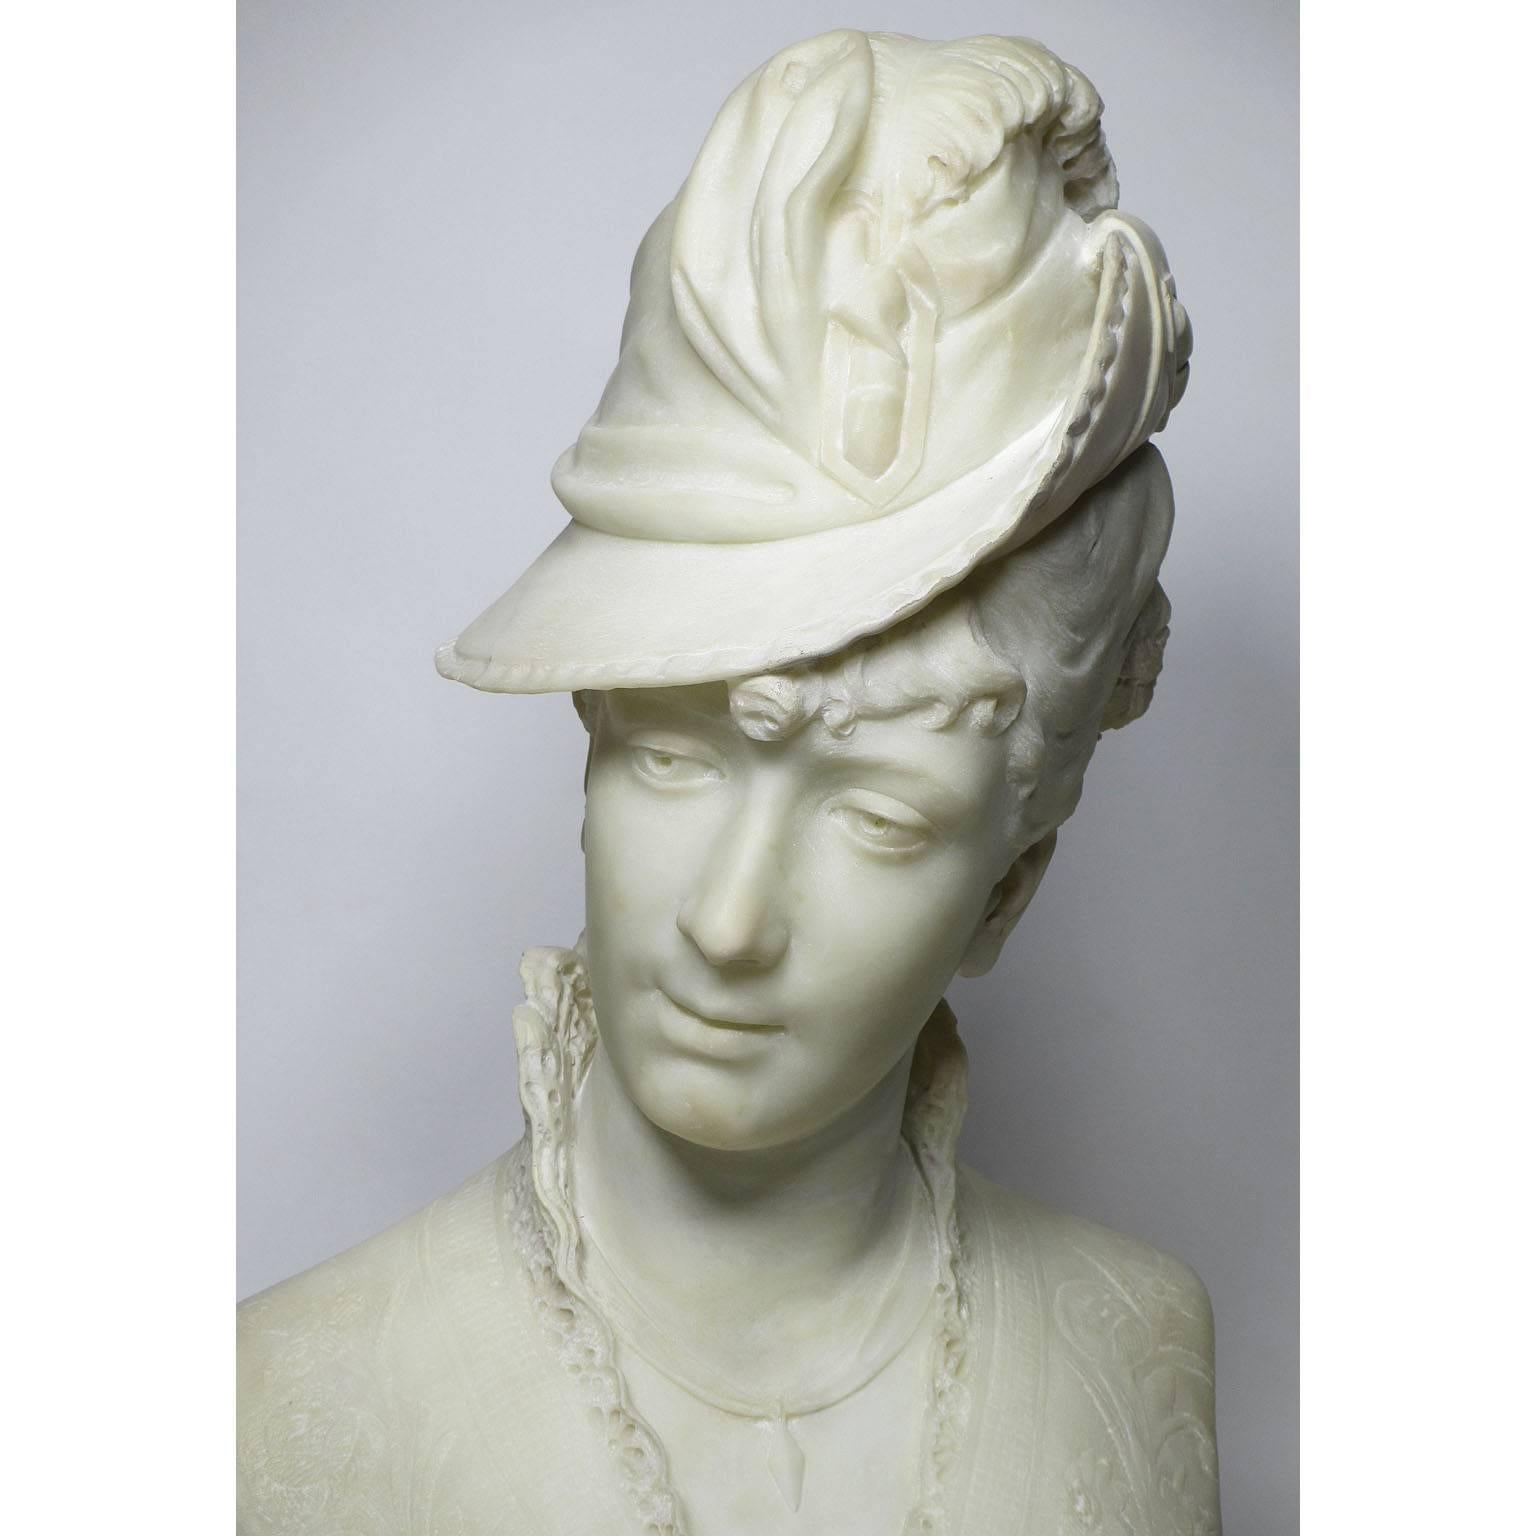 A fine Italian 19th-20th century lifesize carved marble bust of a lady wearing a hat, the beautifully carved marble bust of a lady posing with a gaze to her right, wearing a bonnet with a feather and a laced shirt with a single rosebud in her